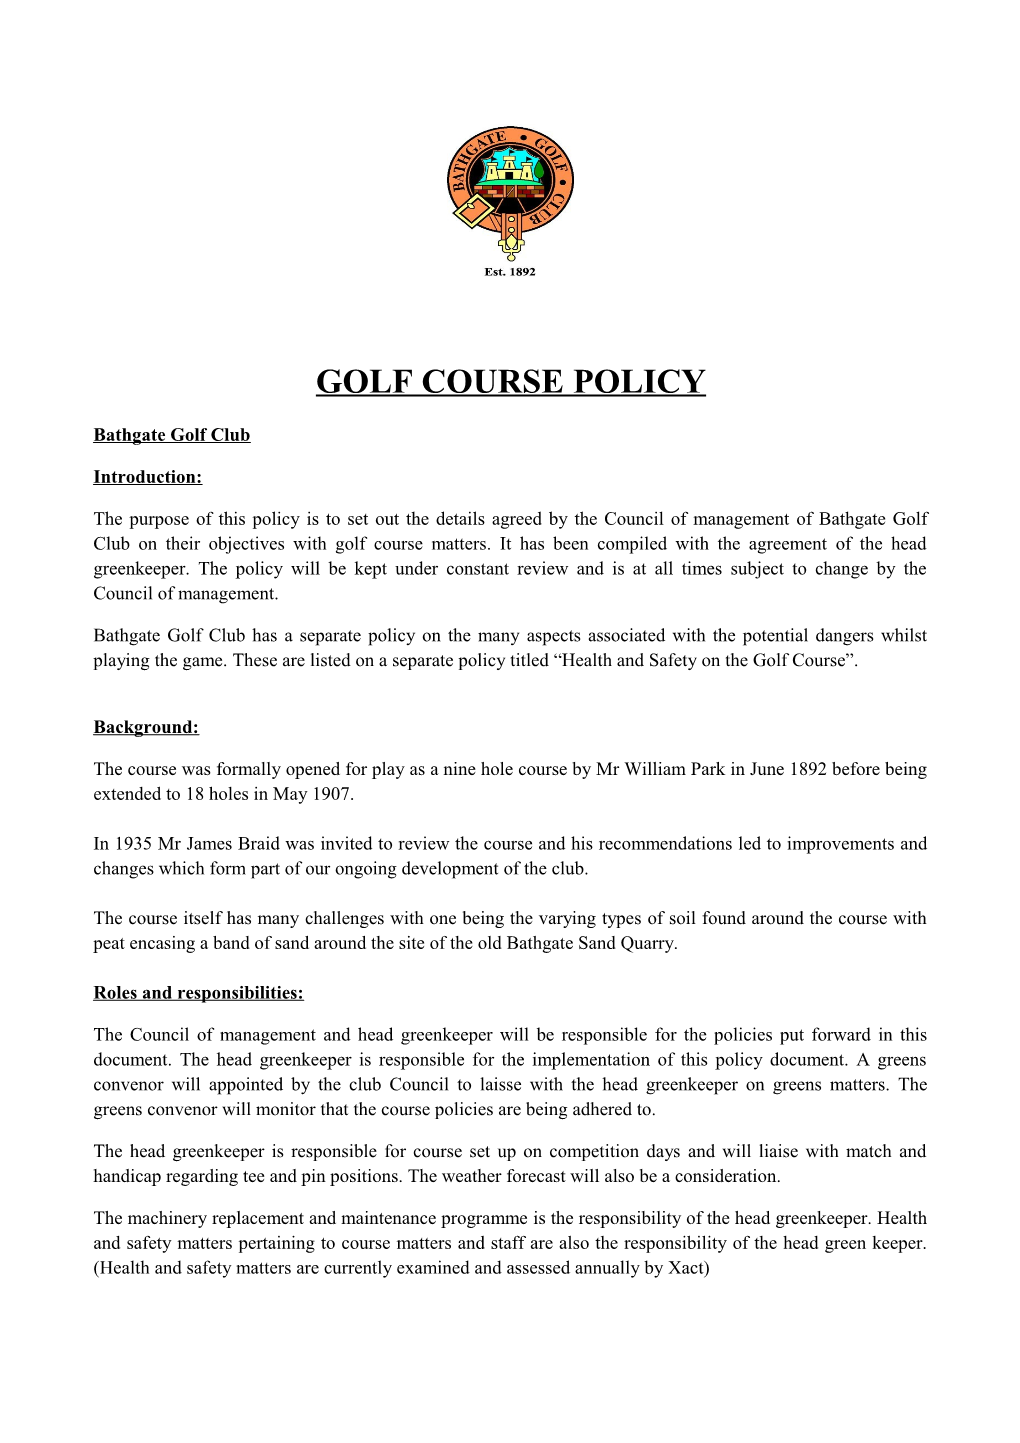 Golf Course Policy